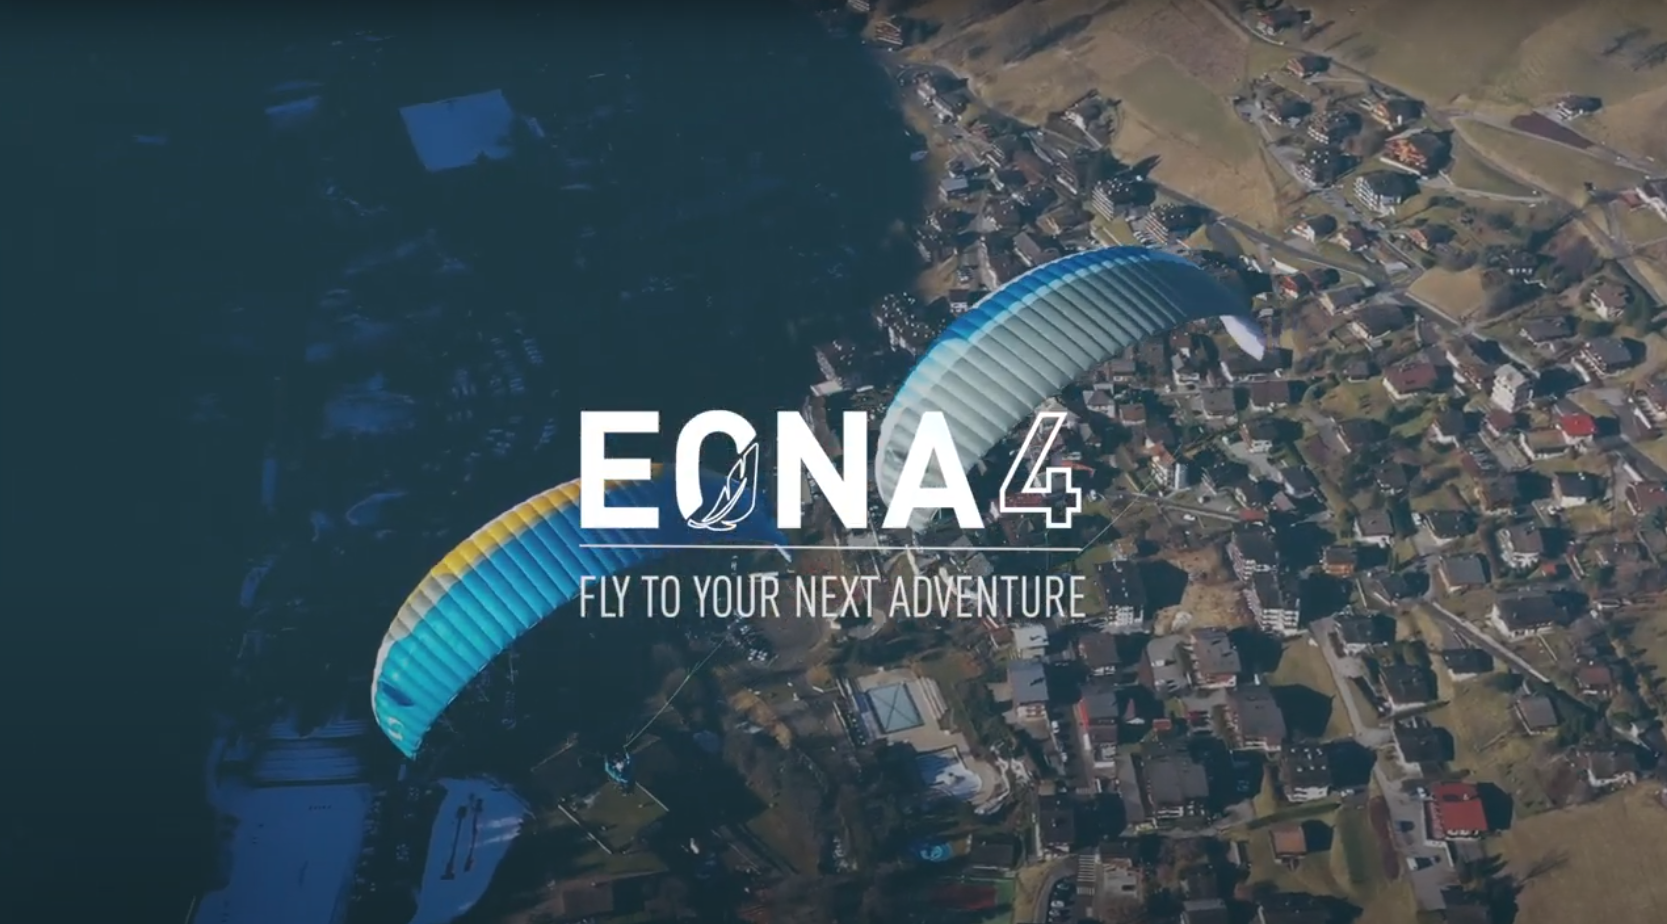 thumbnail of the video presenting the technical details of the EONA4